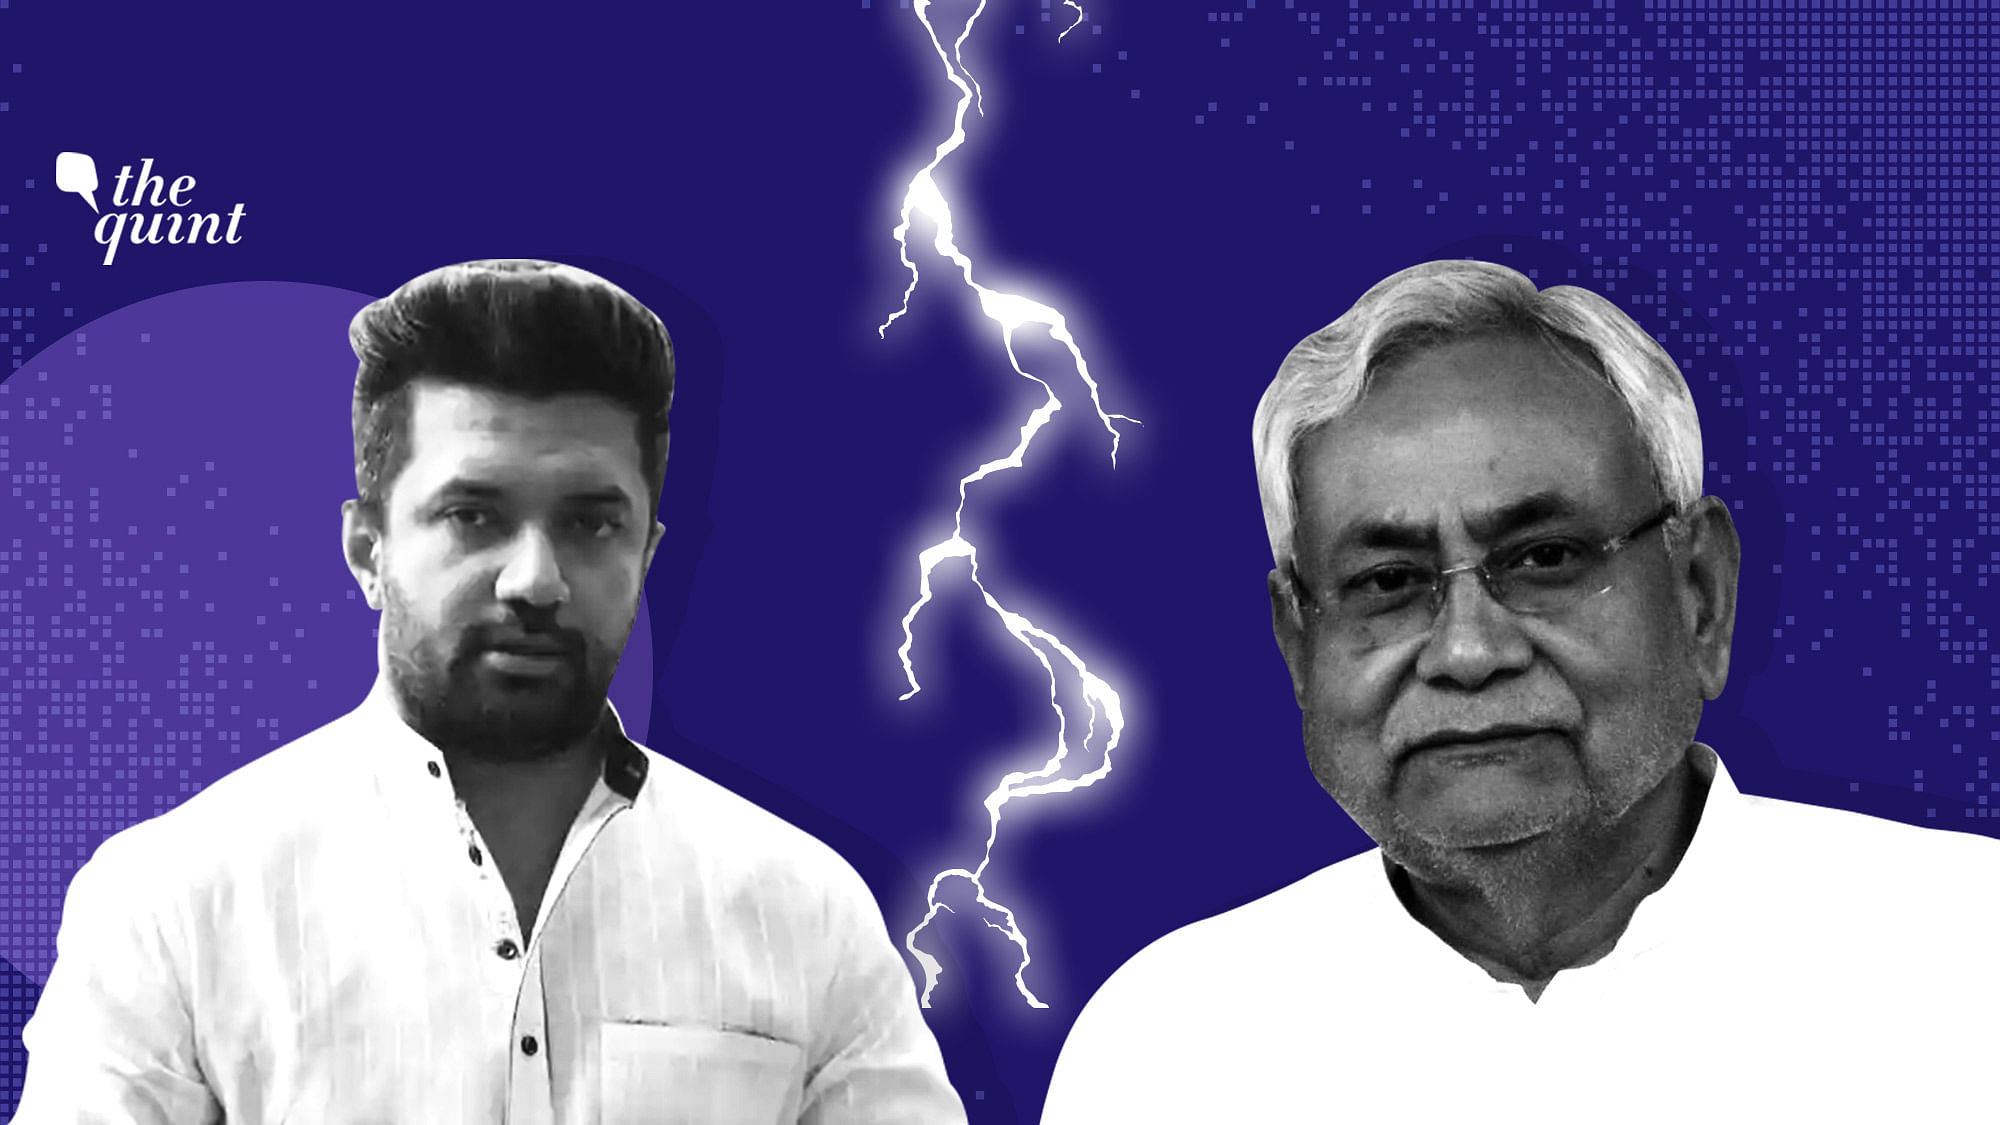  BJP’s understanding of the political reality is the basis for tacit support for Chirag Paswan (L) to loft the banner against Nitish Kumar (R) while reiterating support for BJP. Image used for representation.